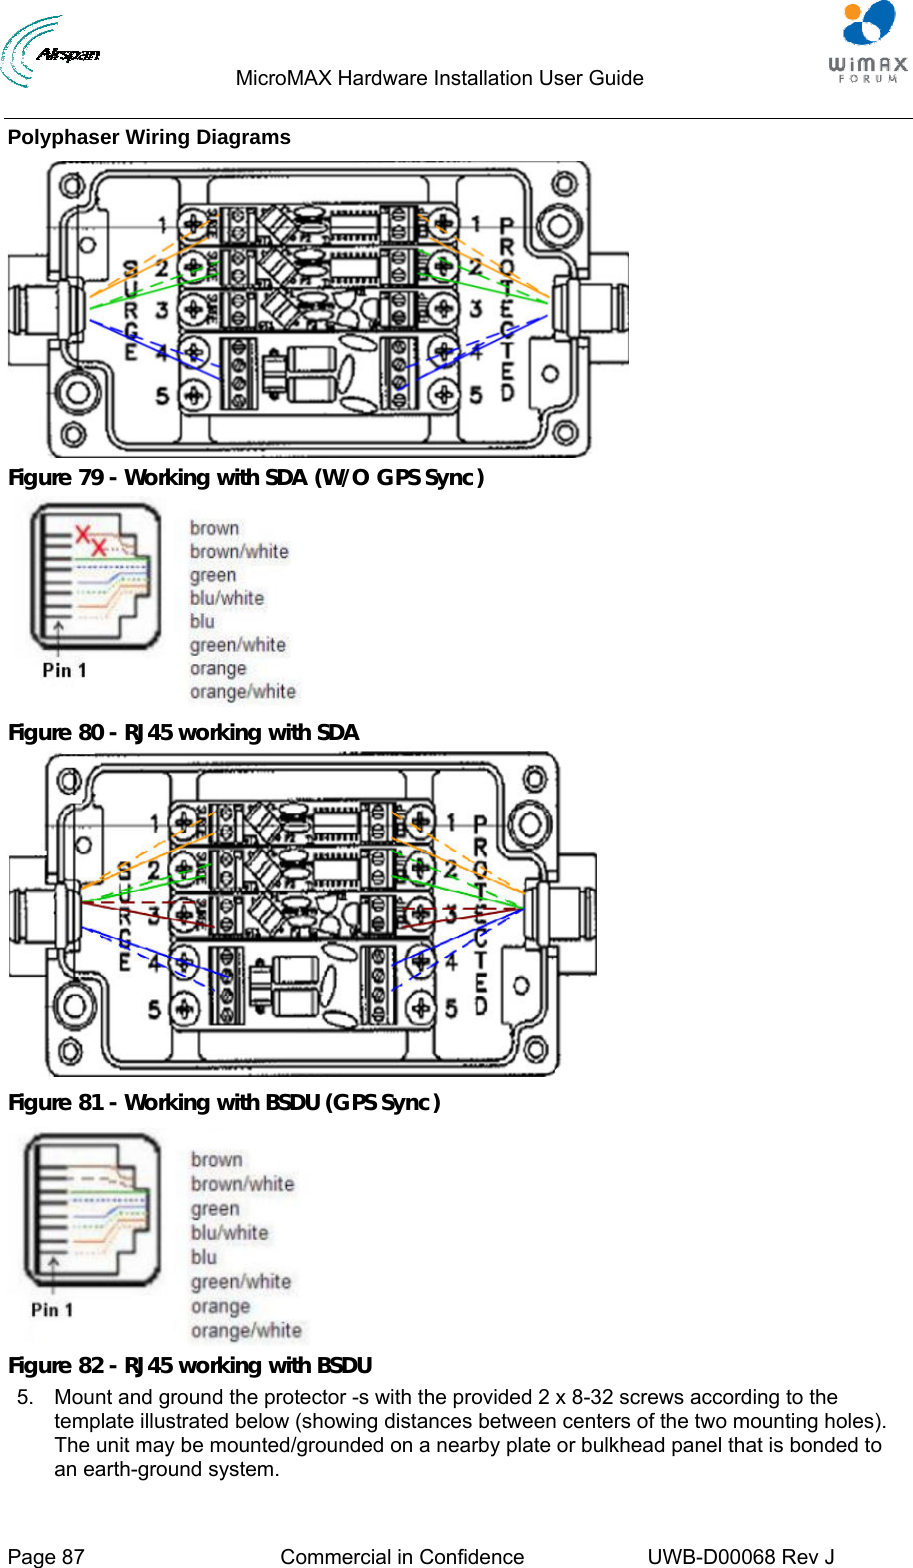                                  MicroMAX Hardware Installation User Guide     Page 87  Commercial in Confidence  UWB-D00068 Rev J   Polyphaser Wiring Diagrams  Figure 79 - Working with SDA (W/O GPS Sync)  Figure 80 - RJ45 working with SDA  Figure 81 - Working with BSDU (GPS Sync)  Figure 82 - RJ45 working with BSDU 5.  Mount and ground the protector -s with the provided 2 x 8-32 screws according to the template illustrated below (showing distances between centers of the two mounting holes). The unit may be mounted/grounded on a nearby plate or bulkhead panel that is bonded to an earth-ground system. 